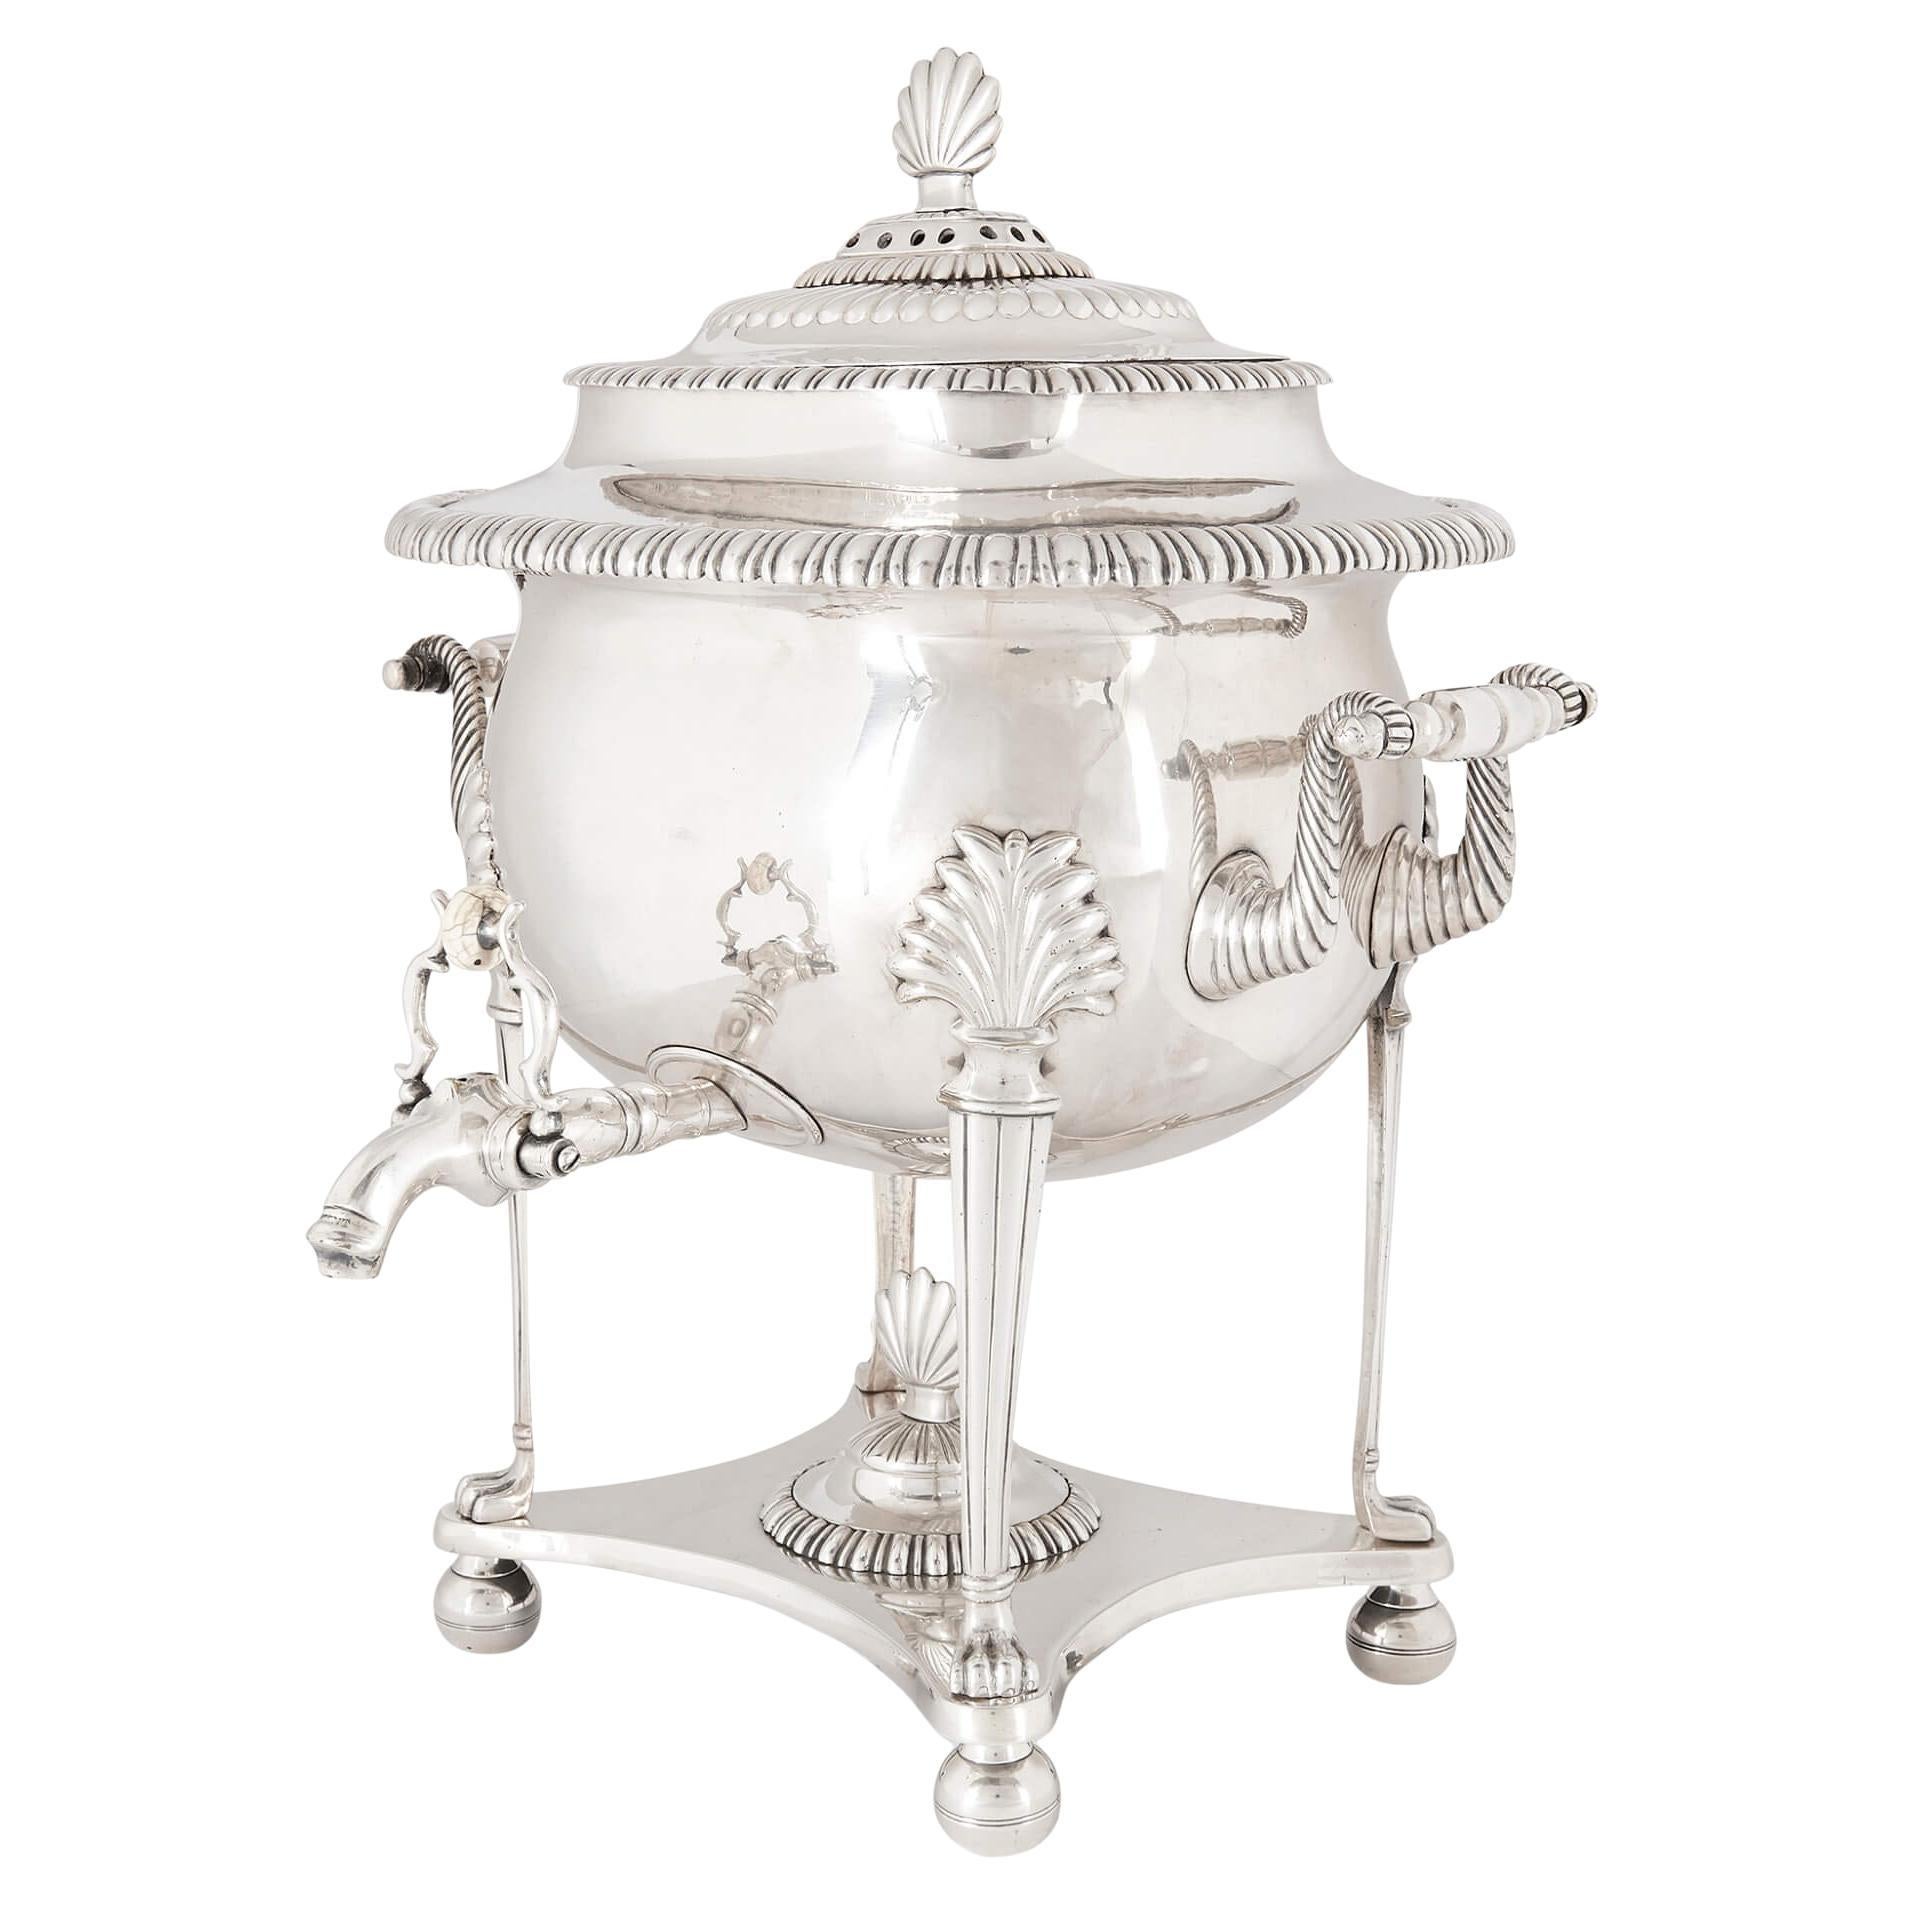 Twin-Handled Antique English Silver Plated Samovar, London, Late 19th Century